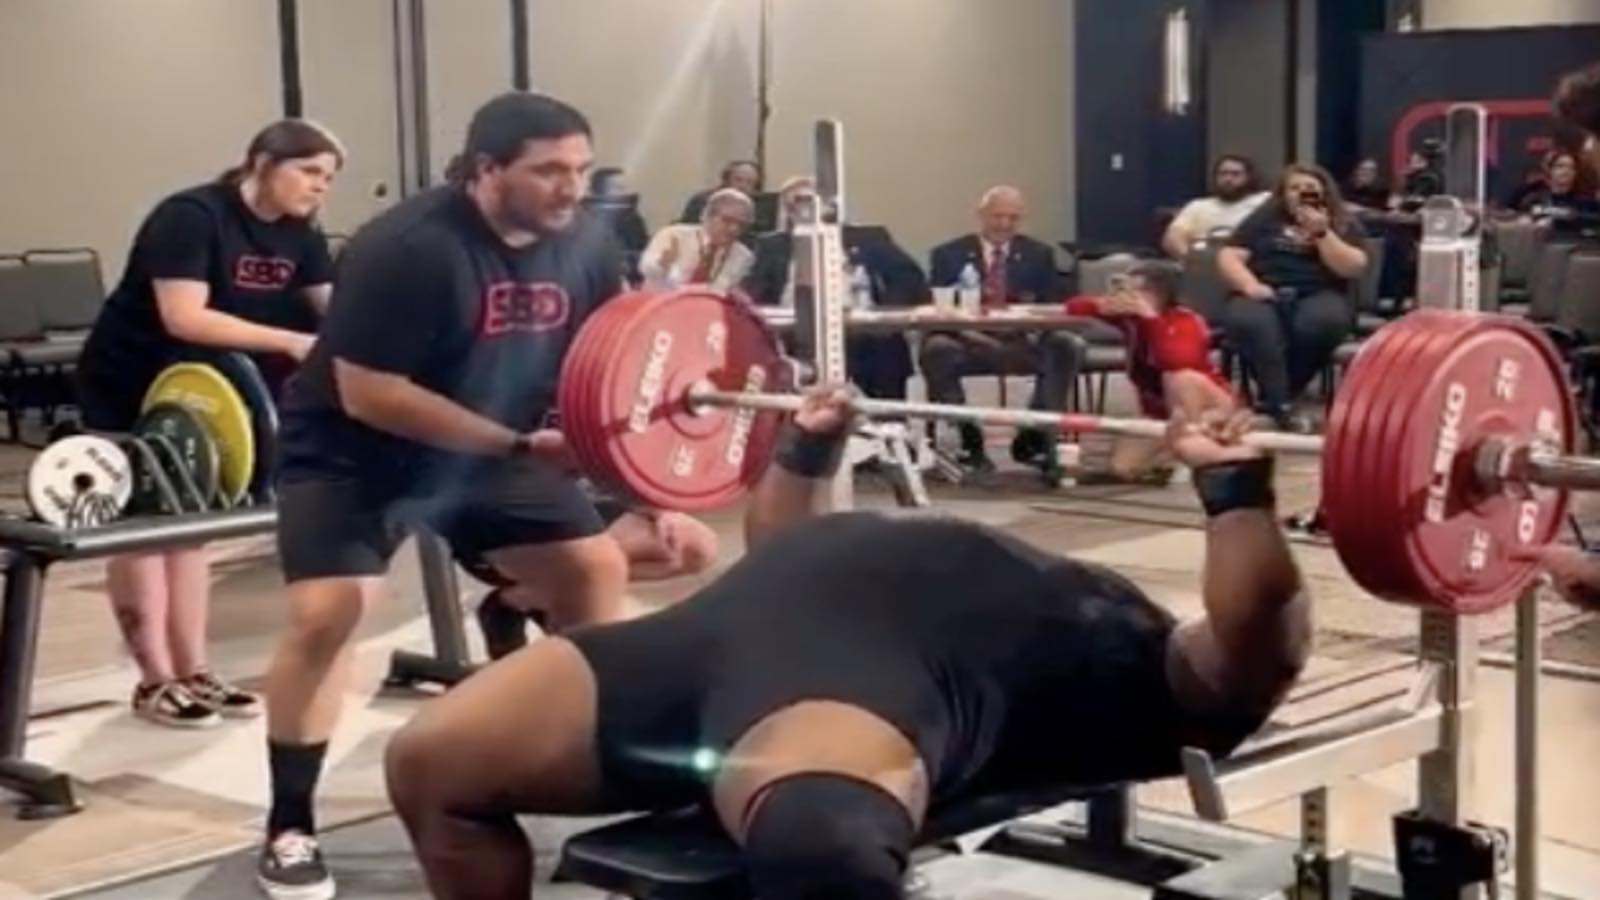 powerlifter-ray-williams-wins-his-7th-raw-national-title-after-gritty-performance-–-breaking-muscle